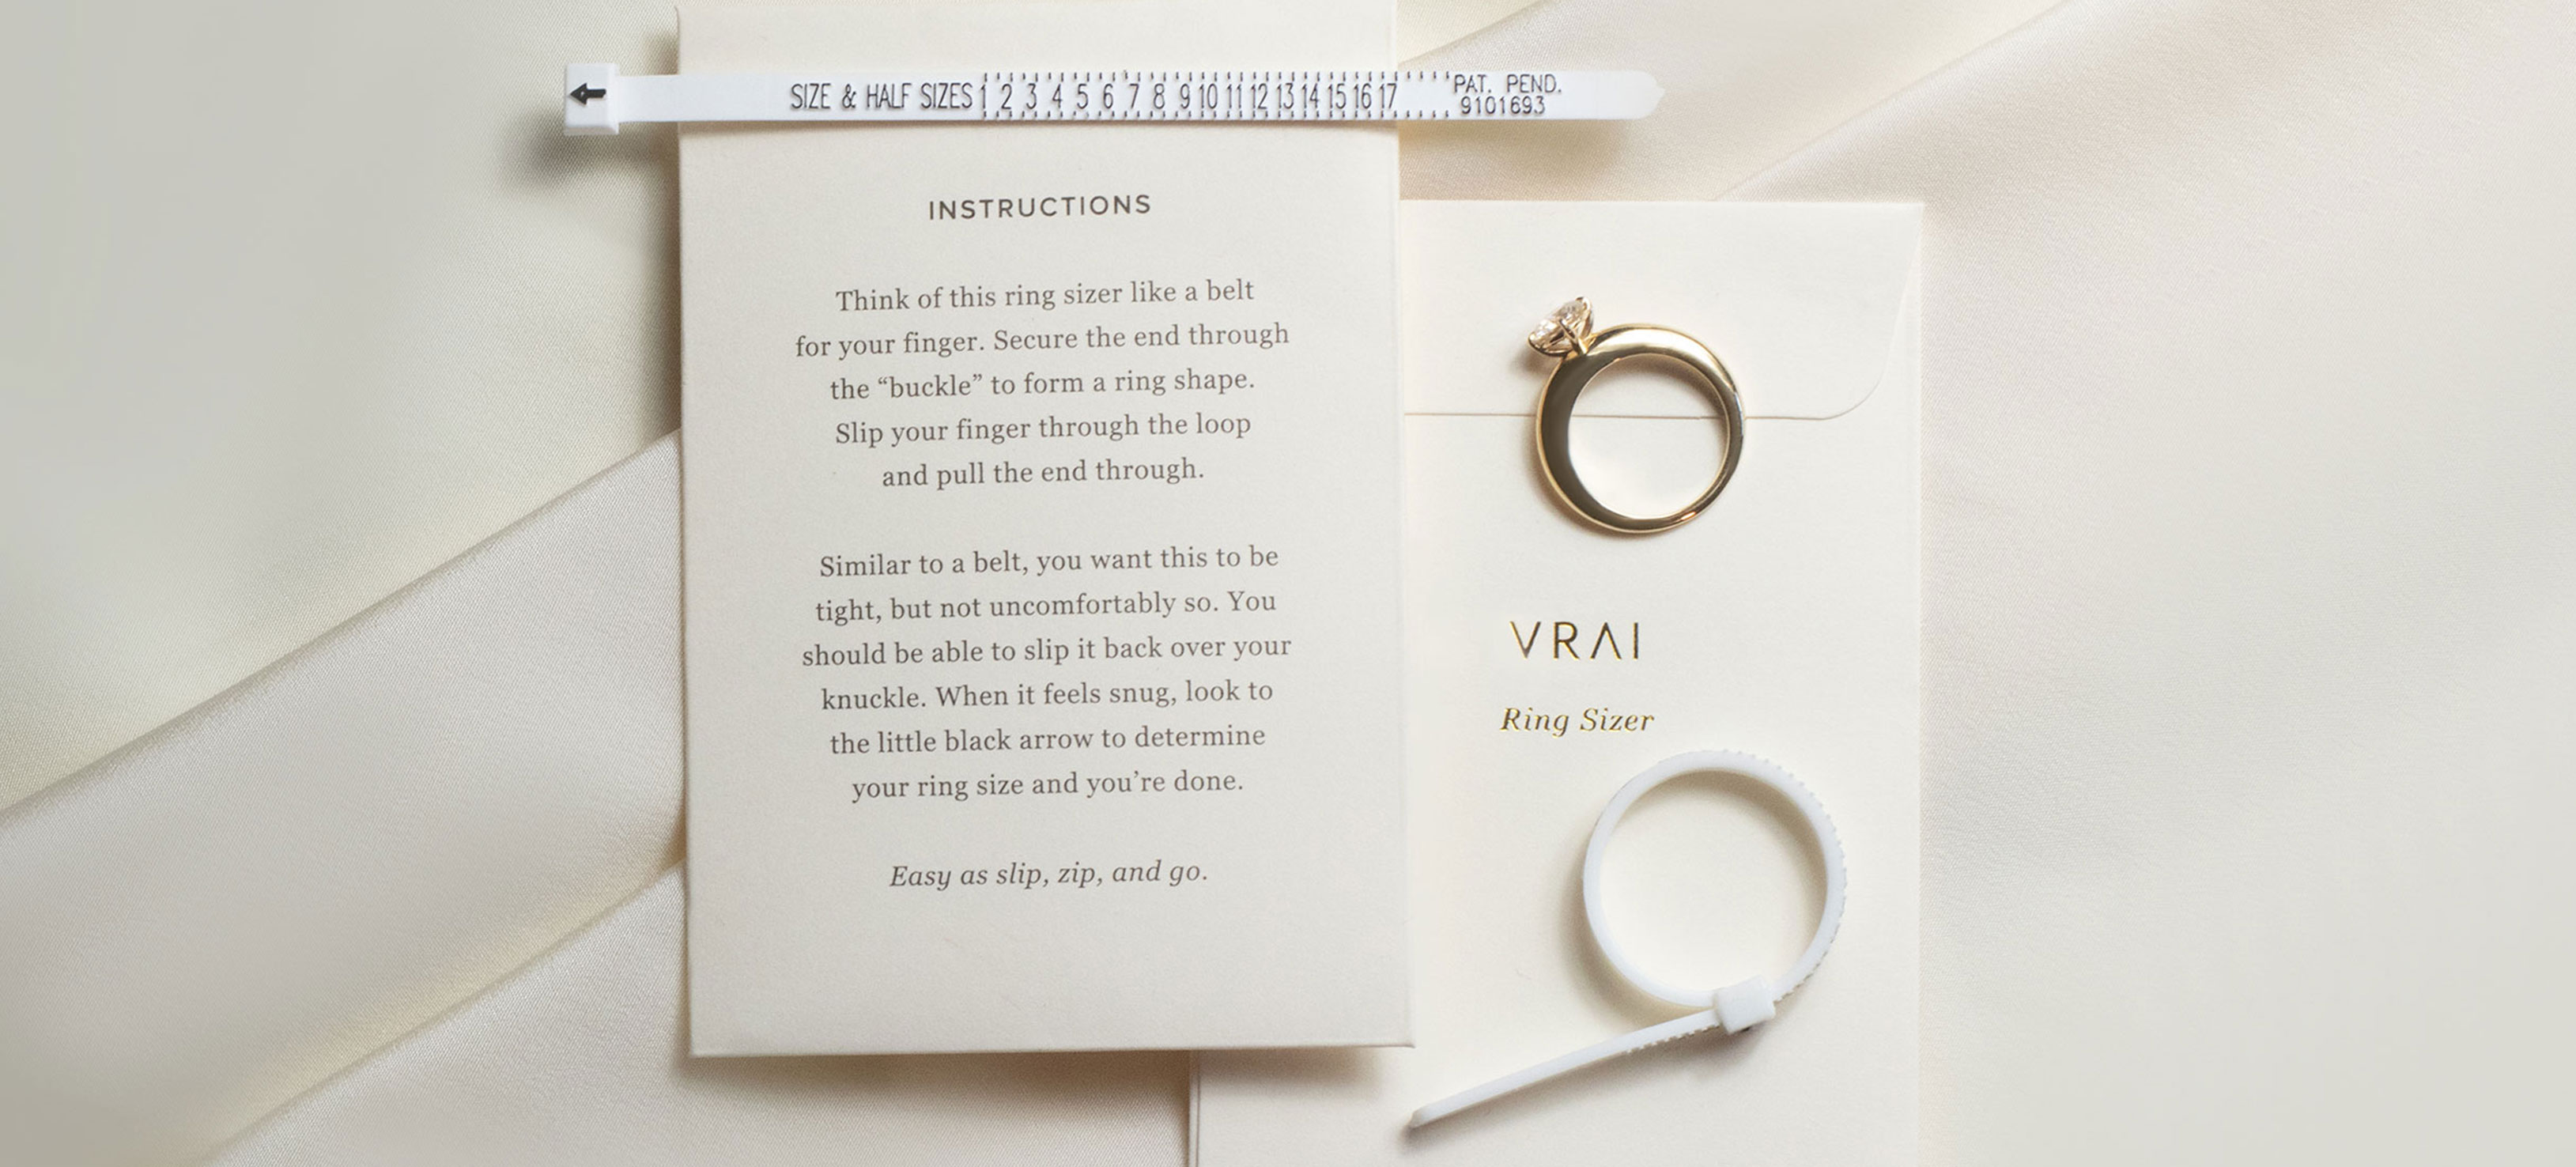 How to Find Your Ring Size in 4 Easy Steps at Home